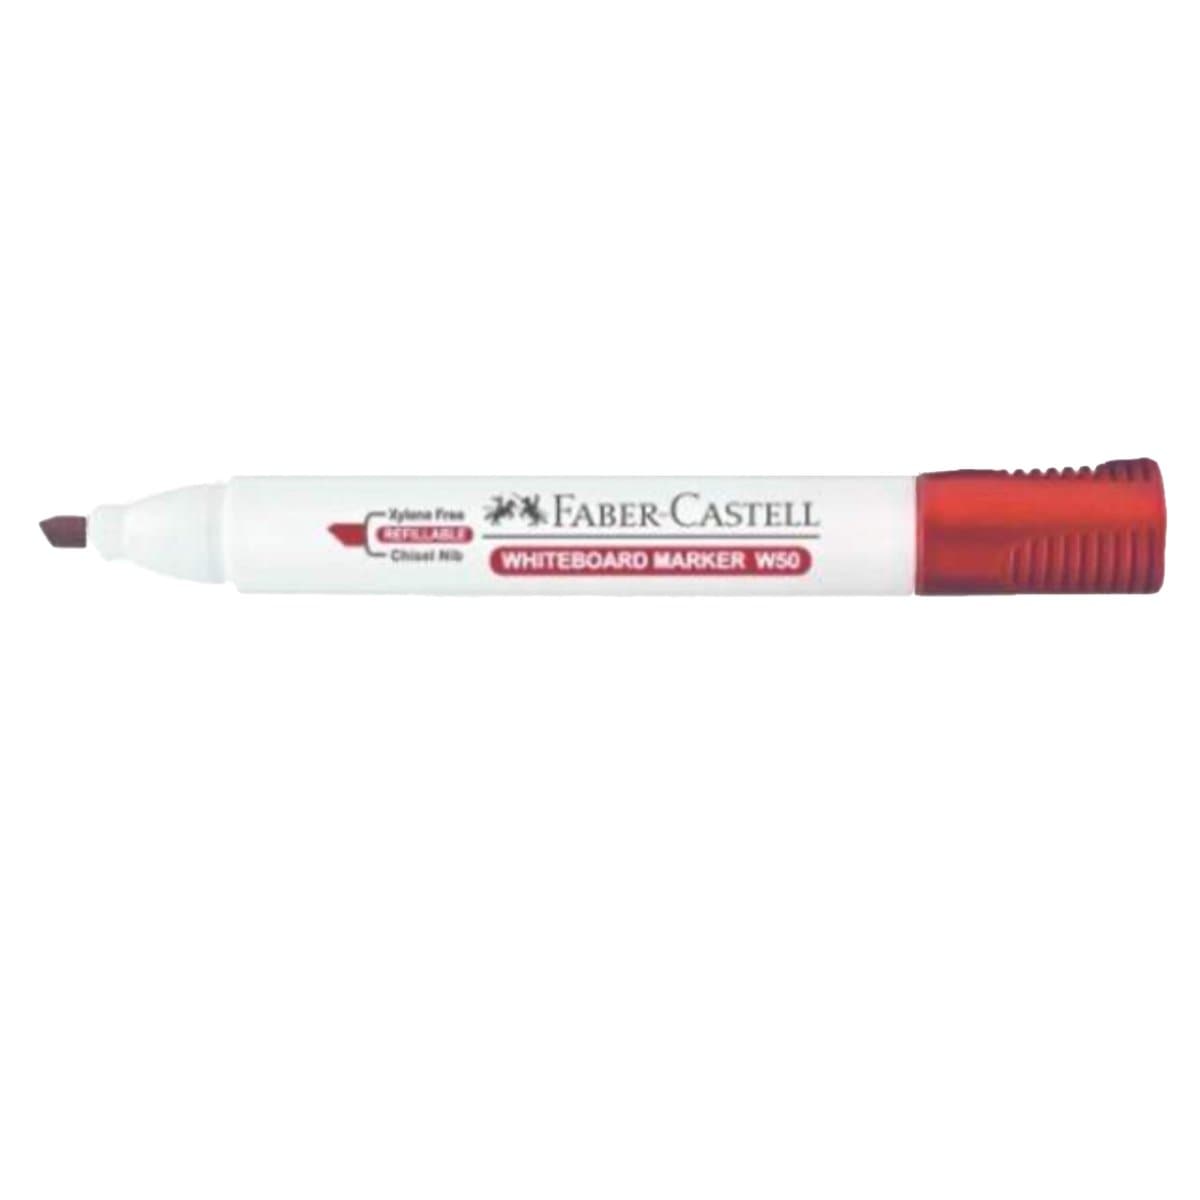 Faber Castell Whiteboard Marker W50, Chisel Tip, Red